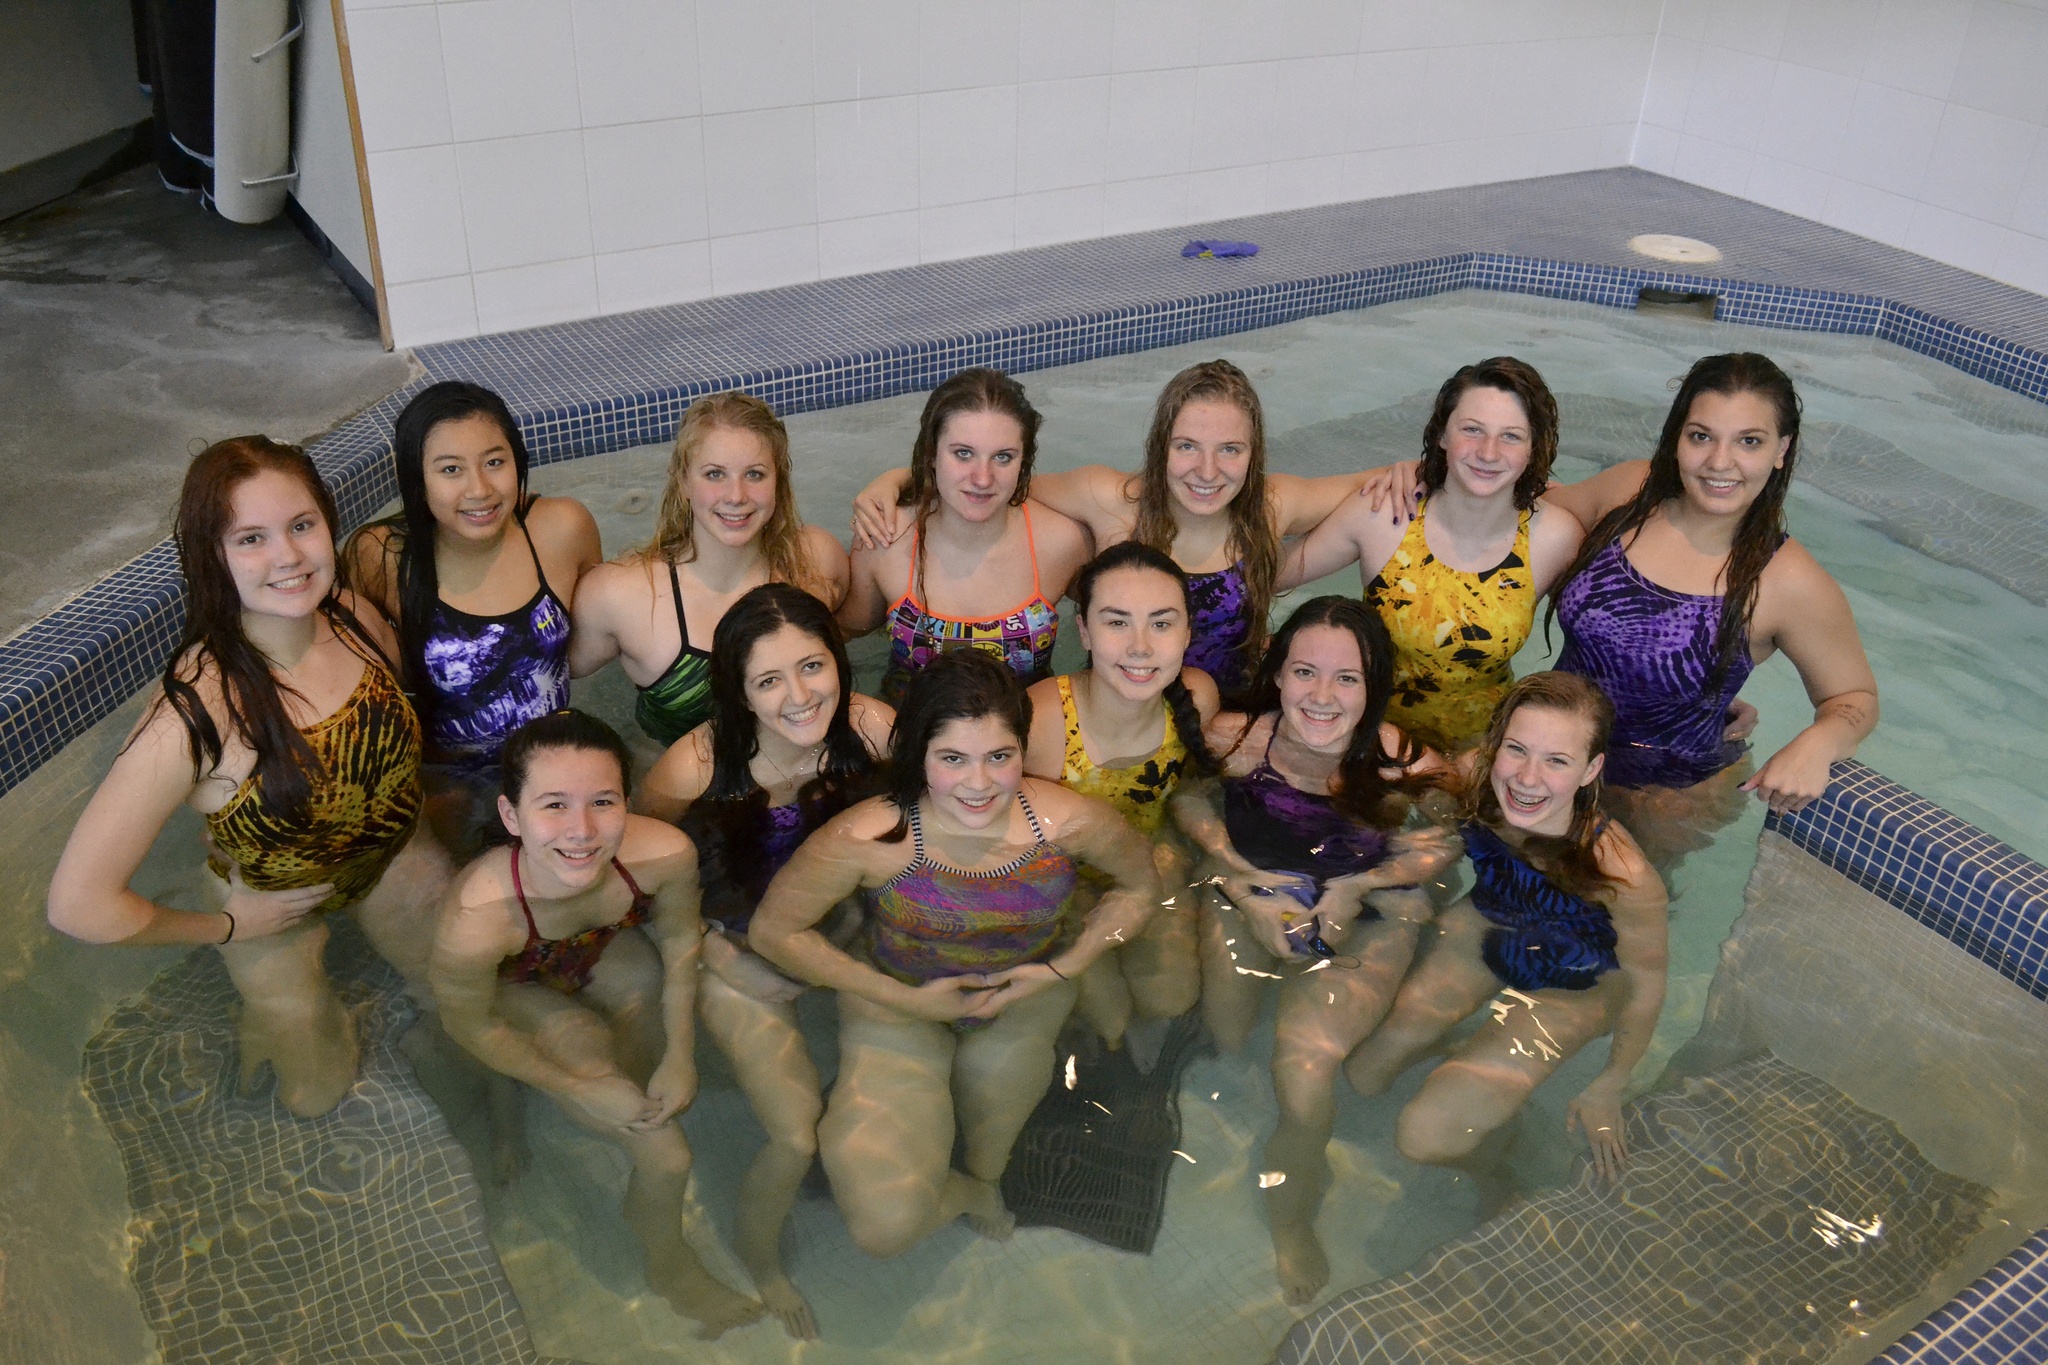 This season, eight girls will compete at the 1A/2A girls swimming districts this weekend. They include Isa Benitez, Joie Darmino, Sonja Govertsen, Jasmine Itti, Sydnee Linnane, Anna Miehe, Sydney Swanson and Meguire Vander Velde. Overall, Sequim saw several girls qualify for districts in similar events — they are, from top left, Stephanie Grow, Jasmine Itti, Joie Darminio, Anna Miehe, Annie Armstrong, Alyssa Garrett, Jaycee Thompson-Porrazzo; front left, Sonja Govertsen, Angela Carrillo-Burge, Isa Benitez, Sydnee Linnane, Sydney Swanson and Meguire Vander Velde. Sequim Gazette photo by Matthew Nash